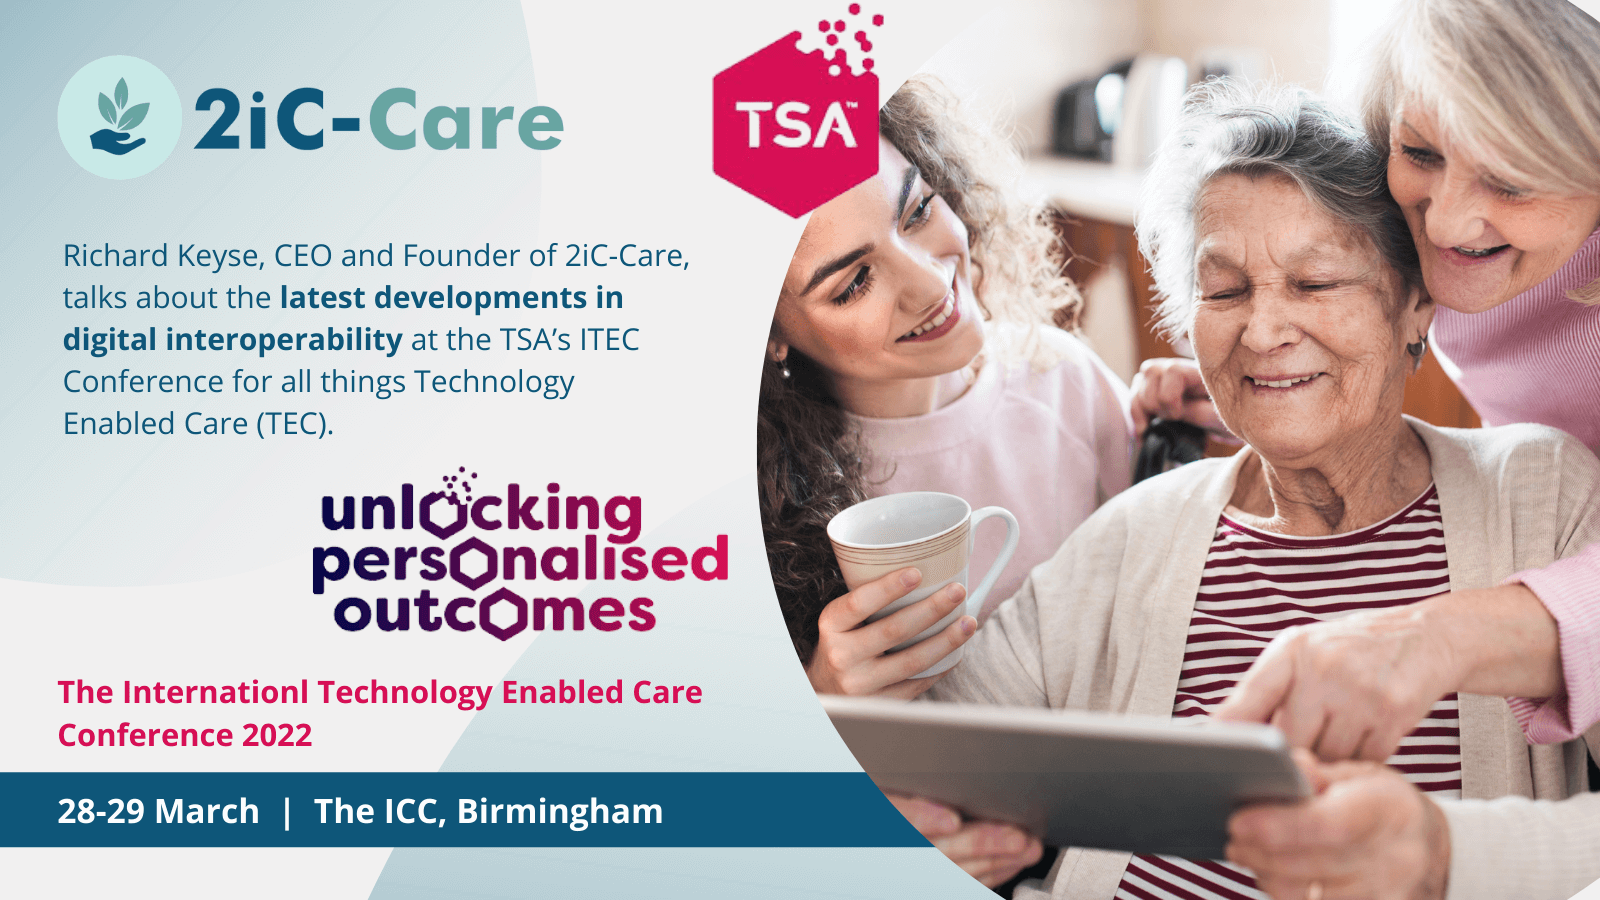 Richard Keyse, CEO and Founder of 2iC-Care, talks about the latest developments in digital interoperability at the TSA’s ITEC Conference for all things Technology Enabled Care (TEC) on 28-29 March